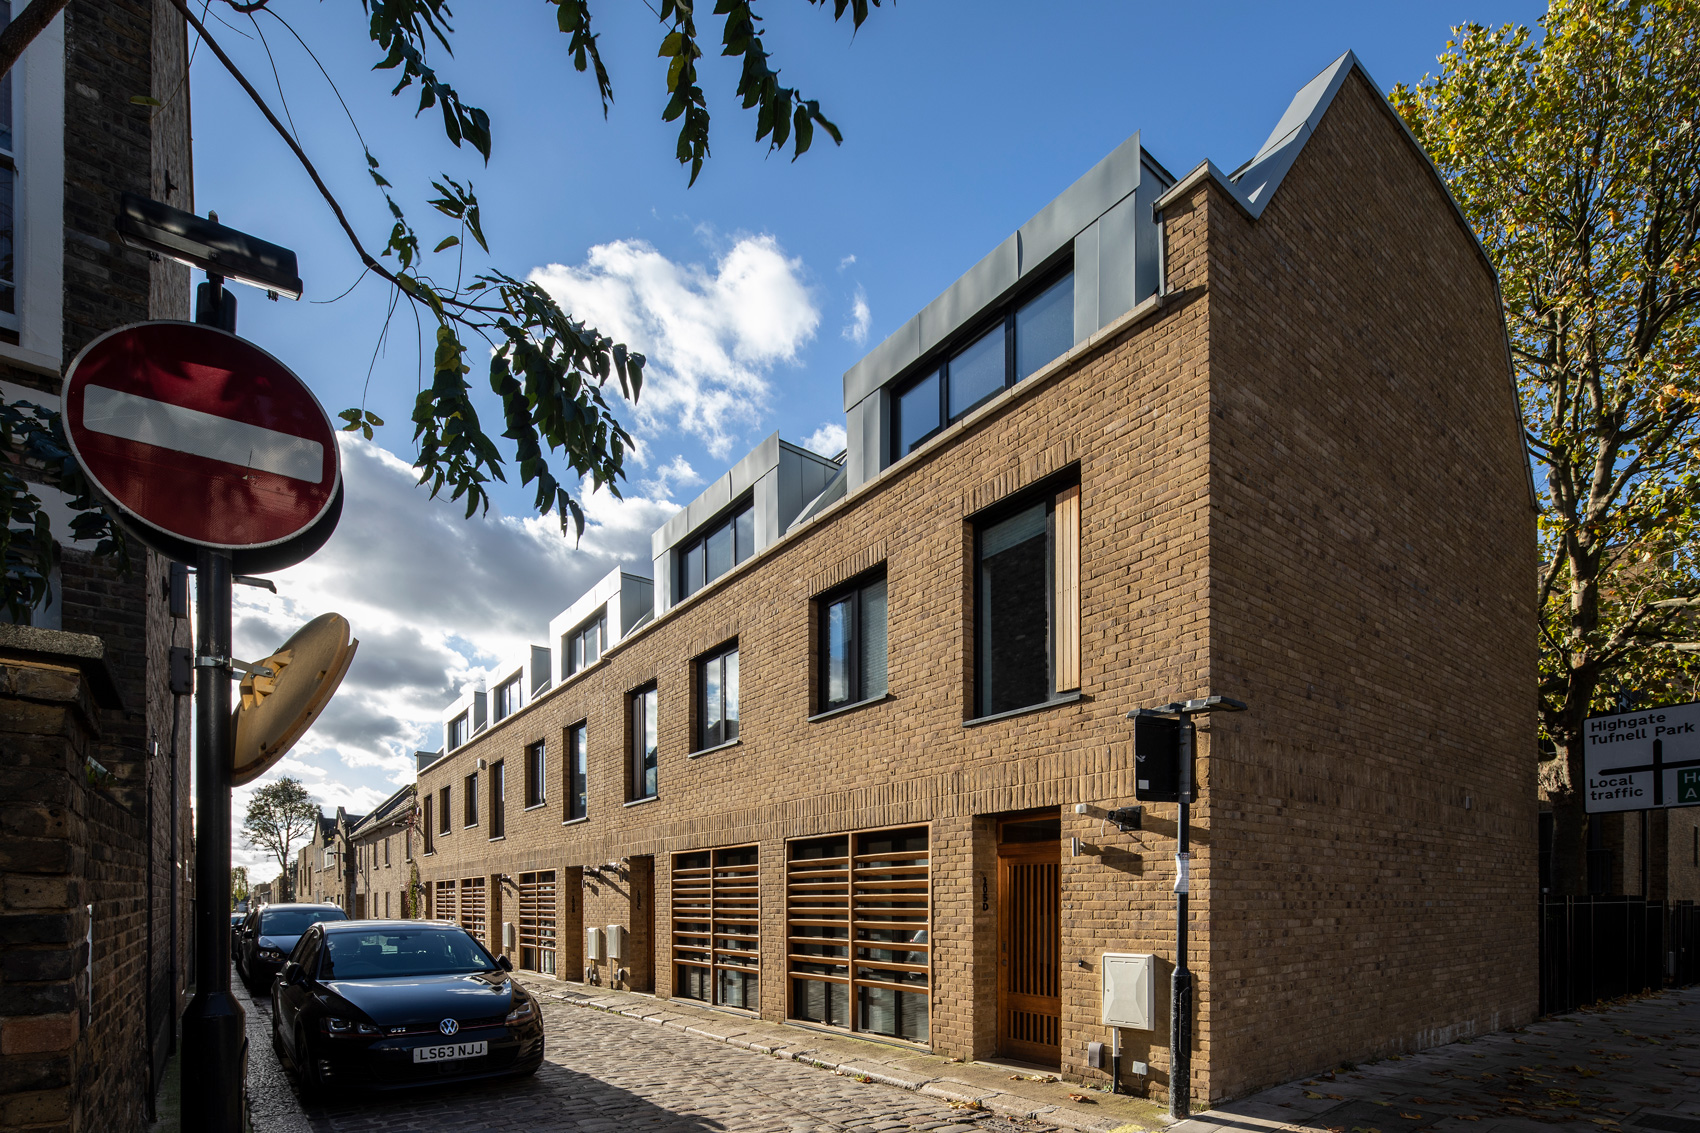 Mews House, Ashton Court, camden, conservation area, London, Residential Architecture, Residential, WWA Studios, WWA, West Waddy Archadia, West Waddy, Archadia, Architecture, Urban Design, Town Planning